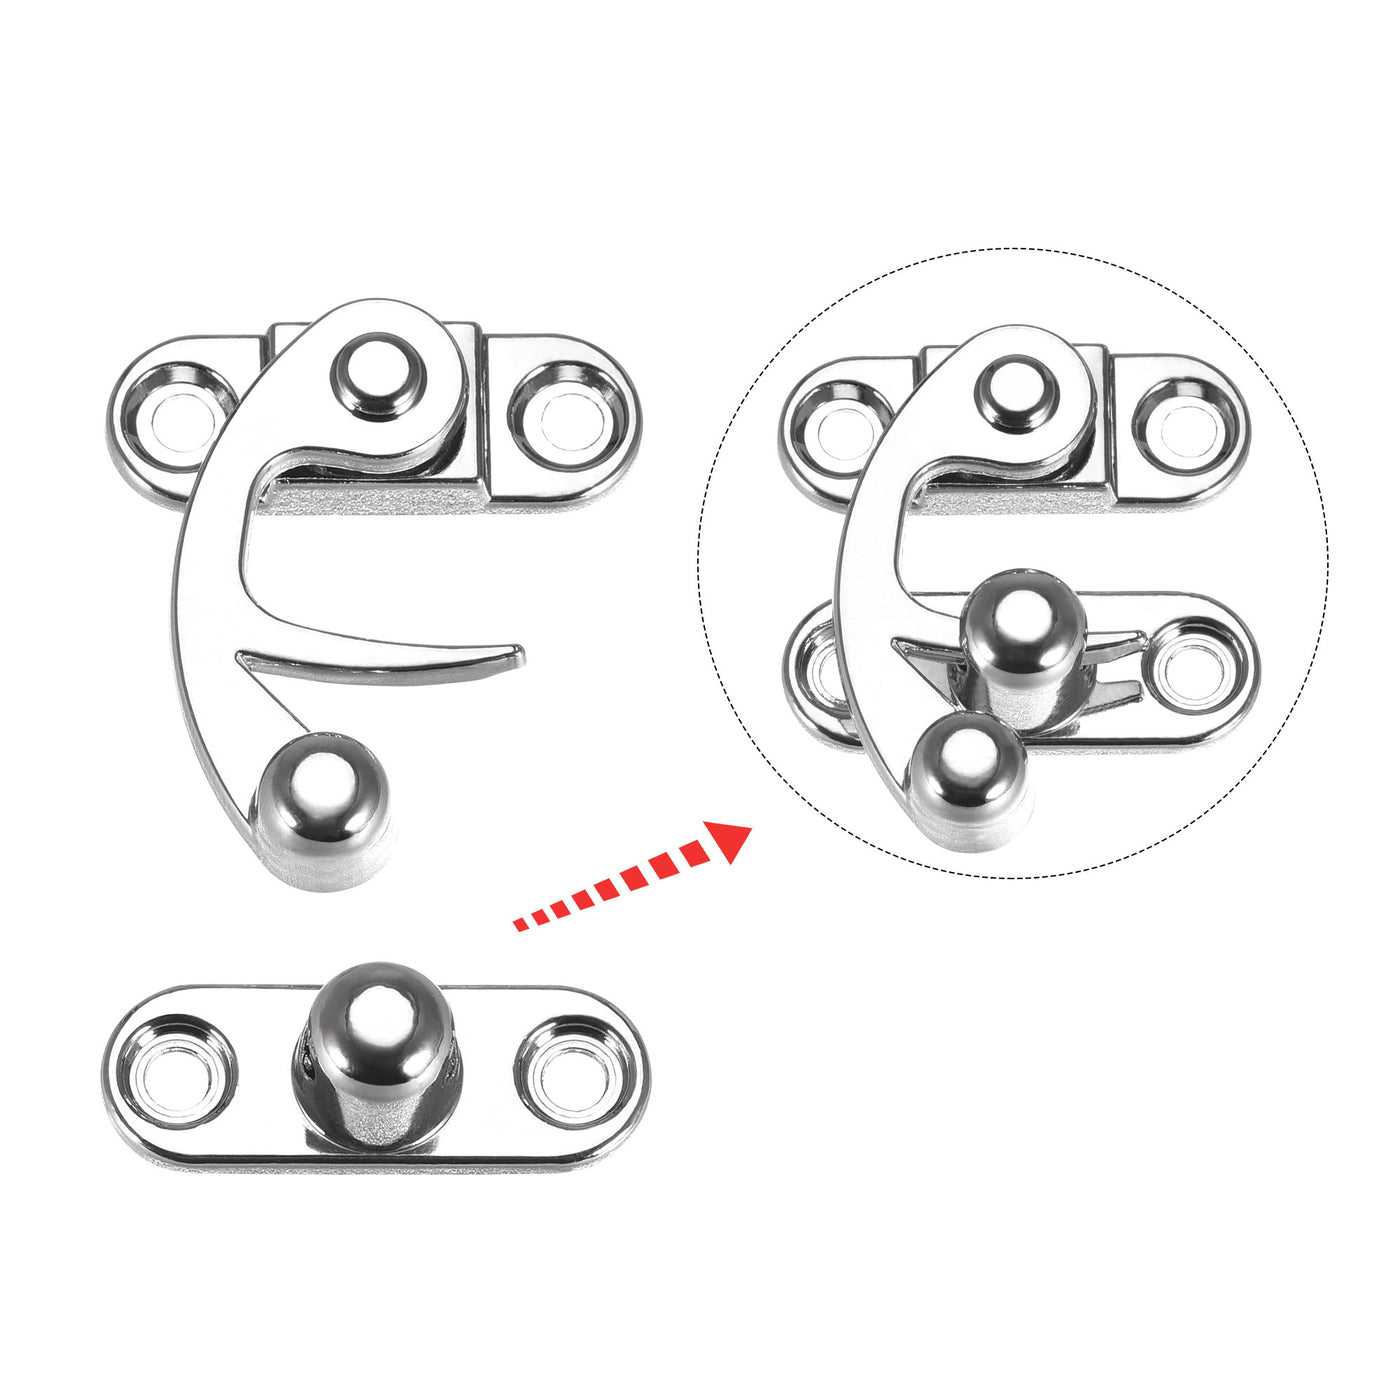 uxcell Uxcell Antique Vintage Lock Clasp Left Latch Hook Hasp 33mmx28mm Swing Arm Latch Silver Tone 2 Pcs